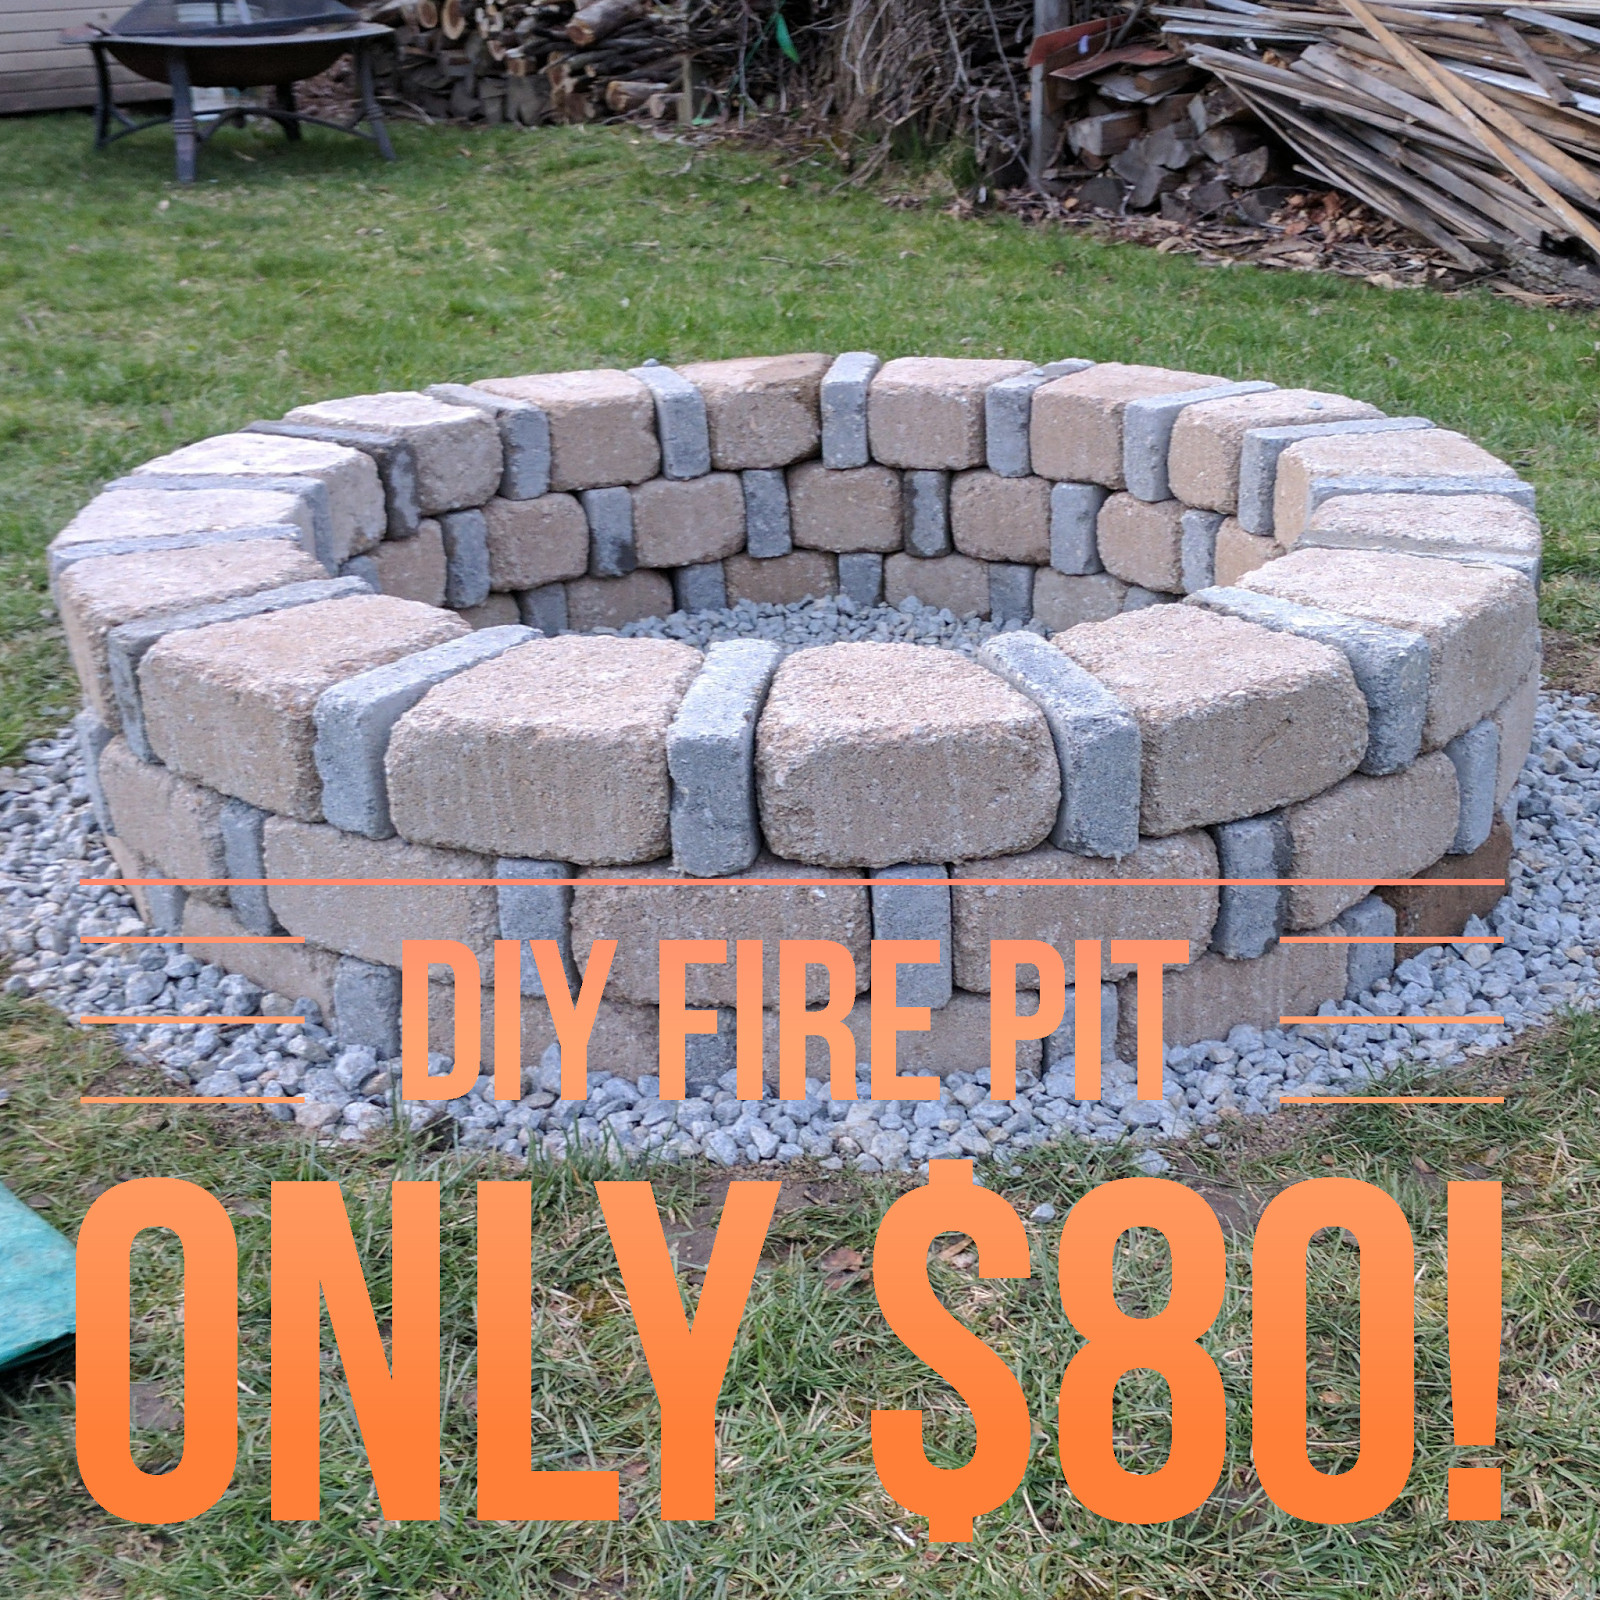 DIY Outdoor Fire Pit
 DIY Brick Fire Pit For ly $80